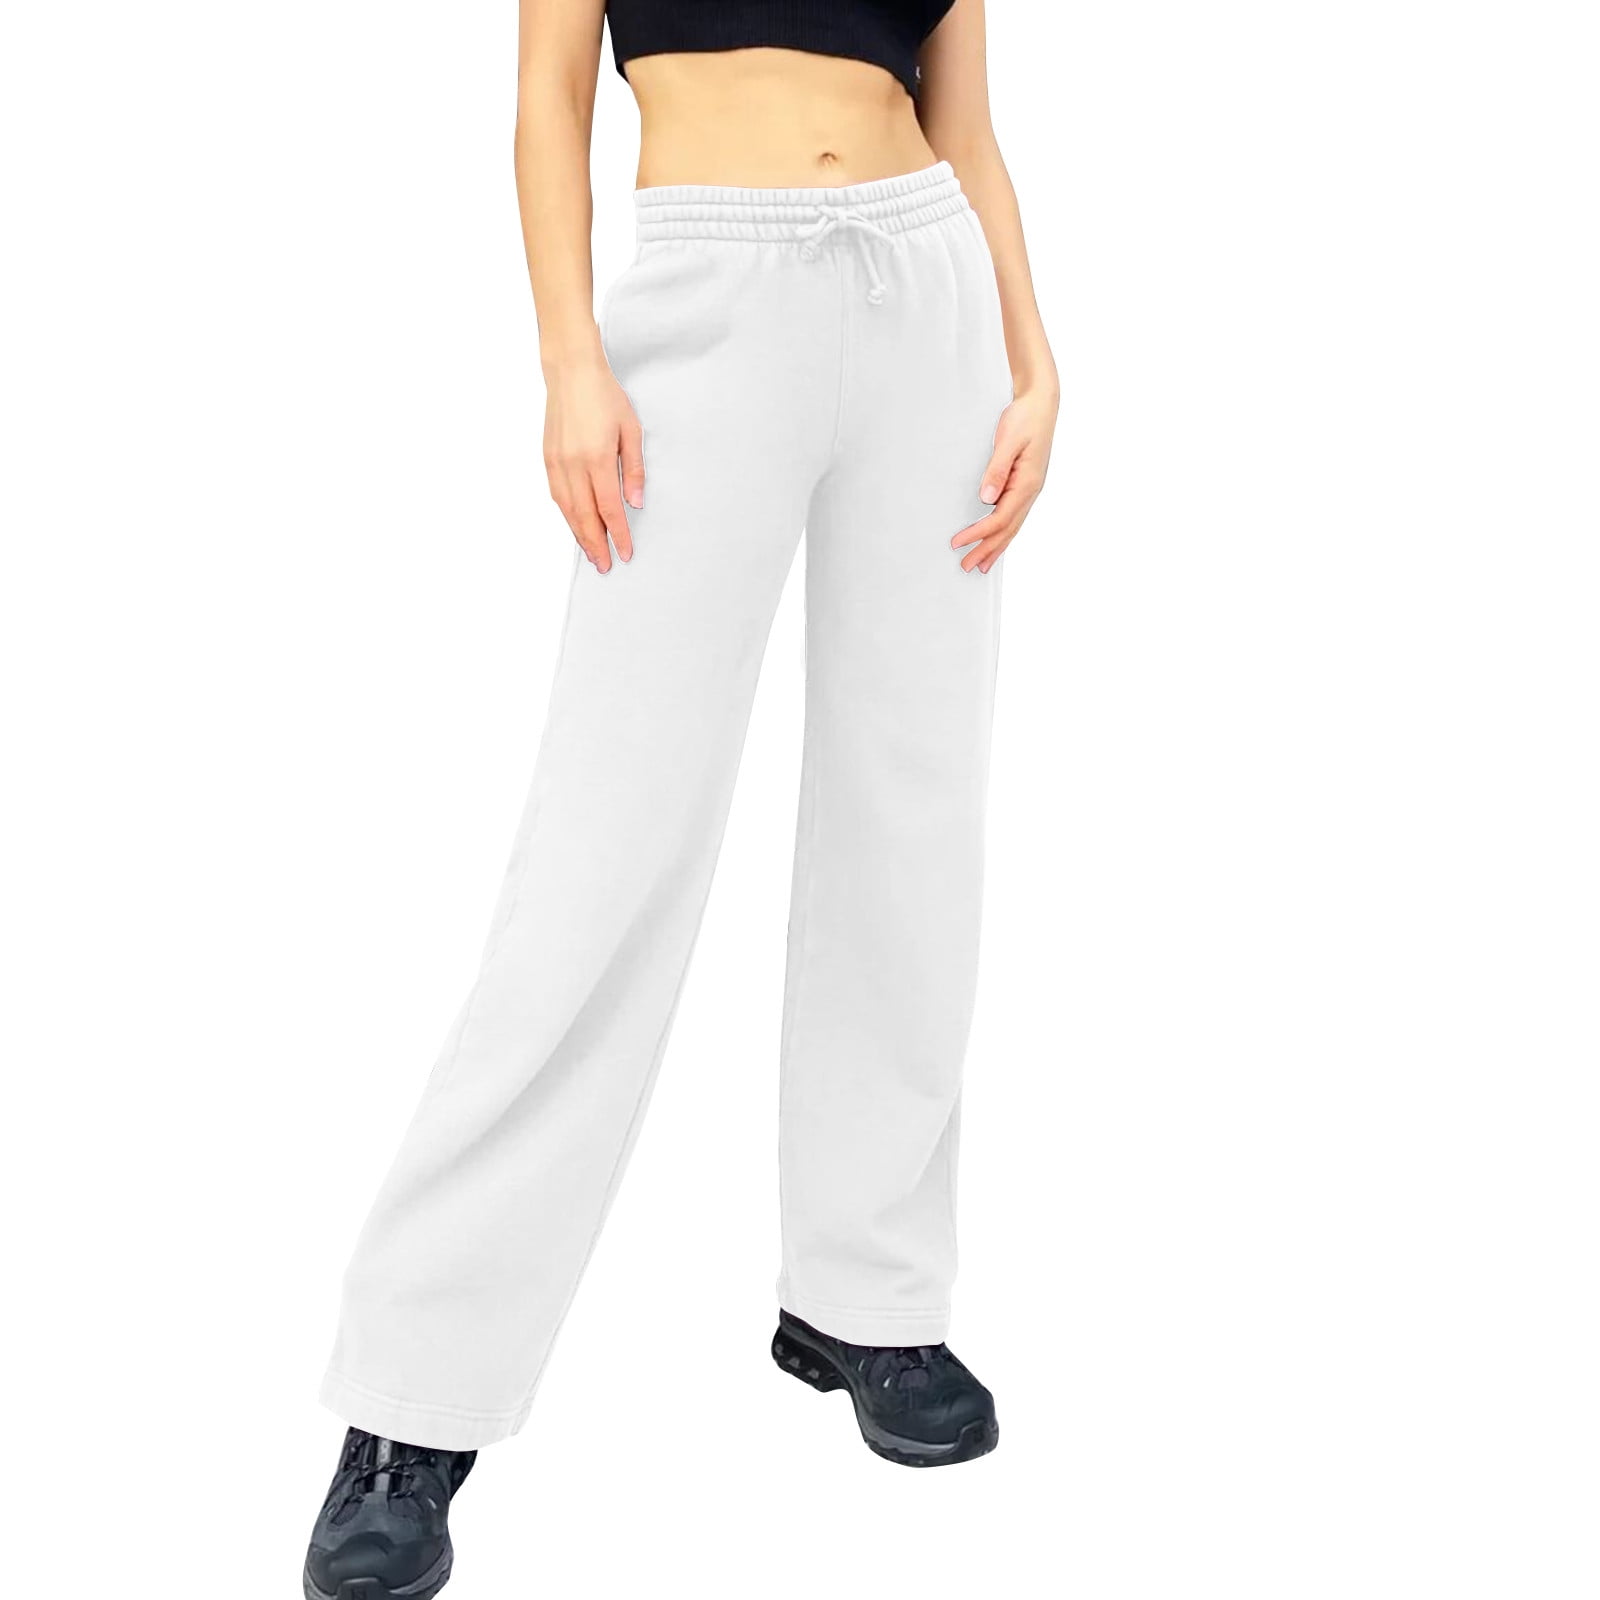 Susanny Petite Sweatpants for Women Petite Straight Leg Drawstring Baggy  Lounge Pants Fleece Lined Lightweight with Pockets High Waisted High Rise